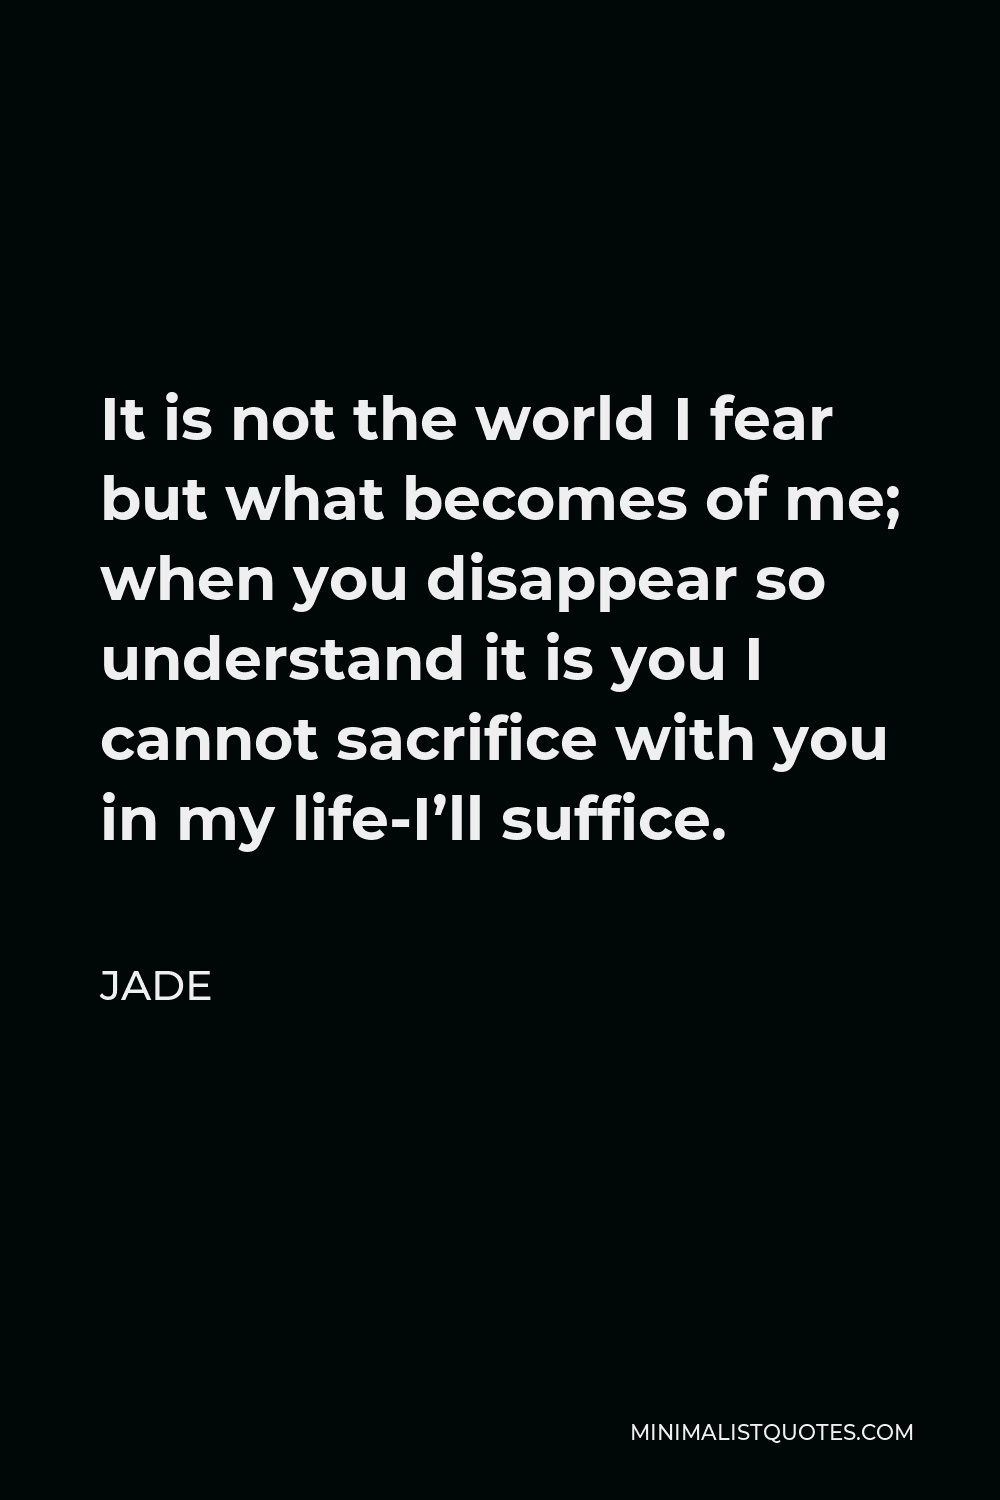 Jade Quote - It is not the world I fear but what becomes of me; when you disappear so understand it is you I cannot sacrifice with you in my life-I’ll suffice.